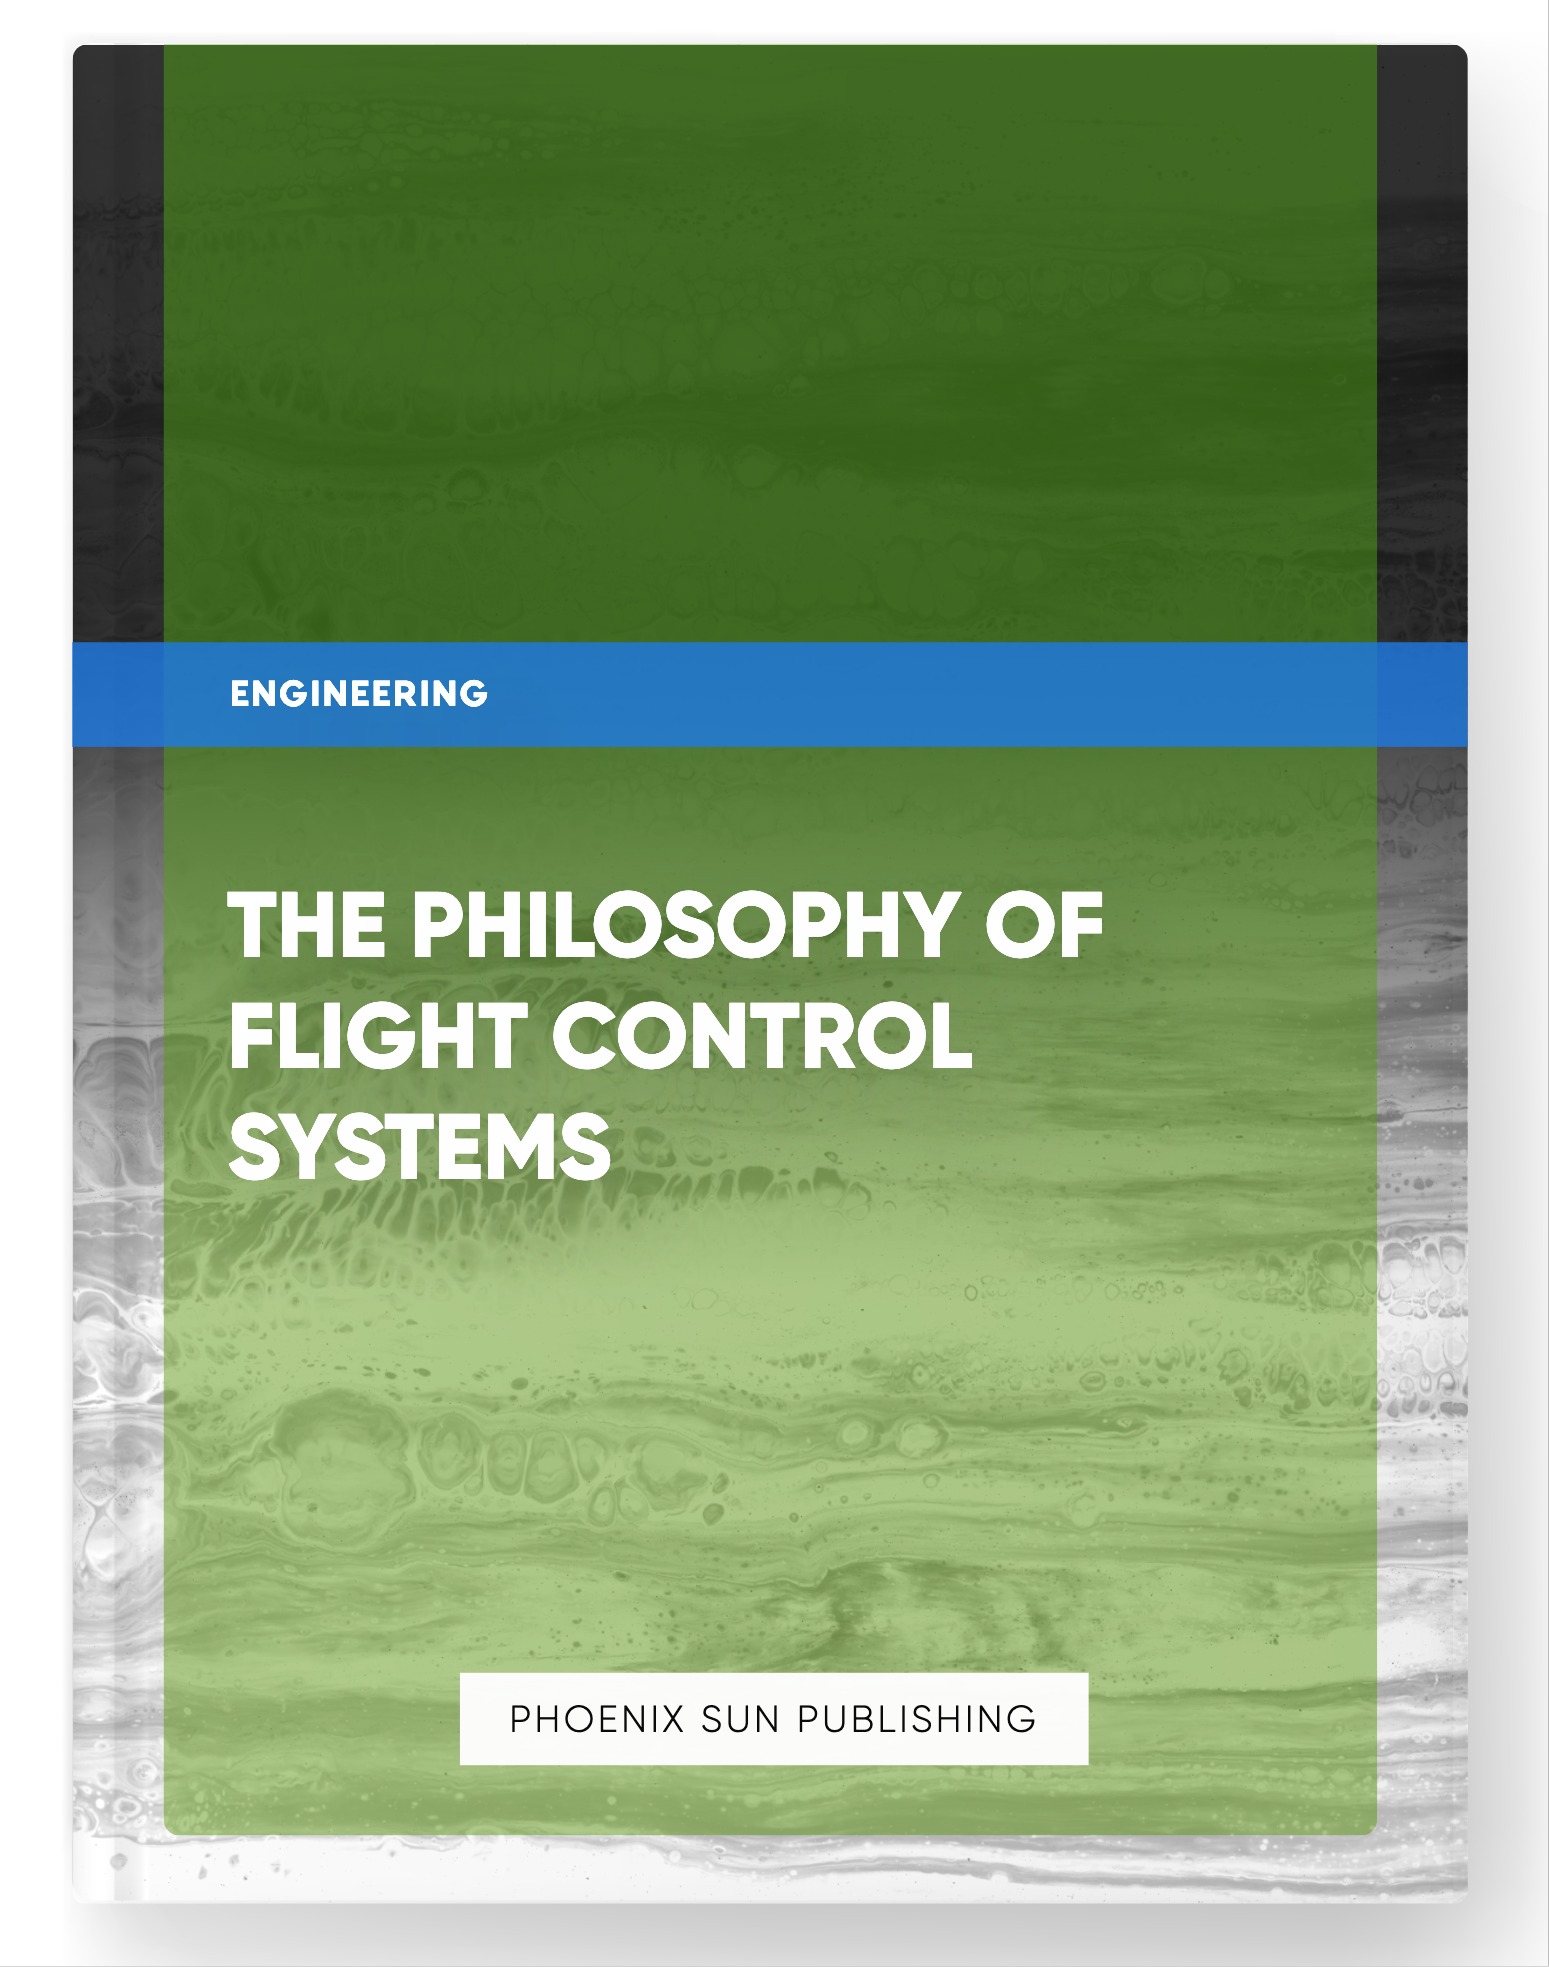 The Philosophy of Flight Control Systems